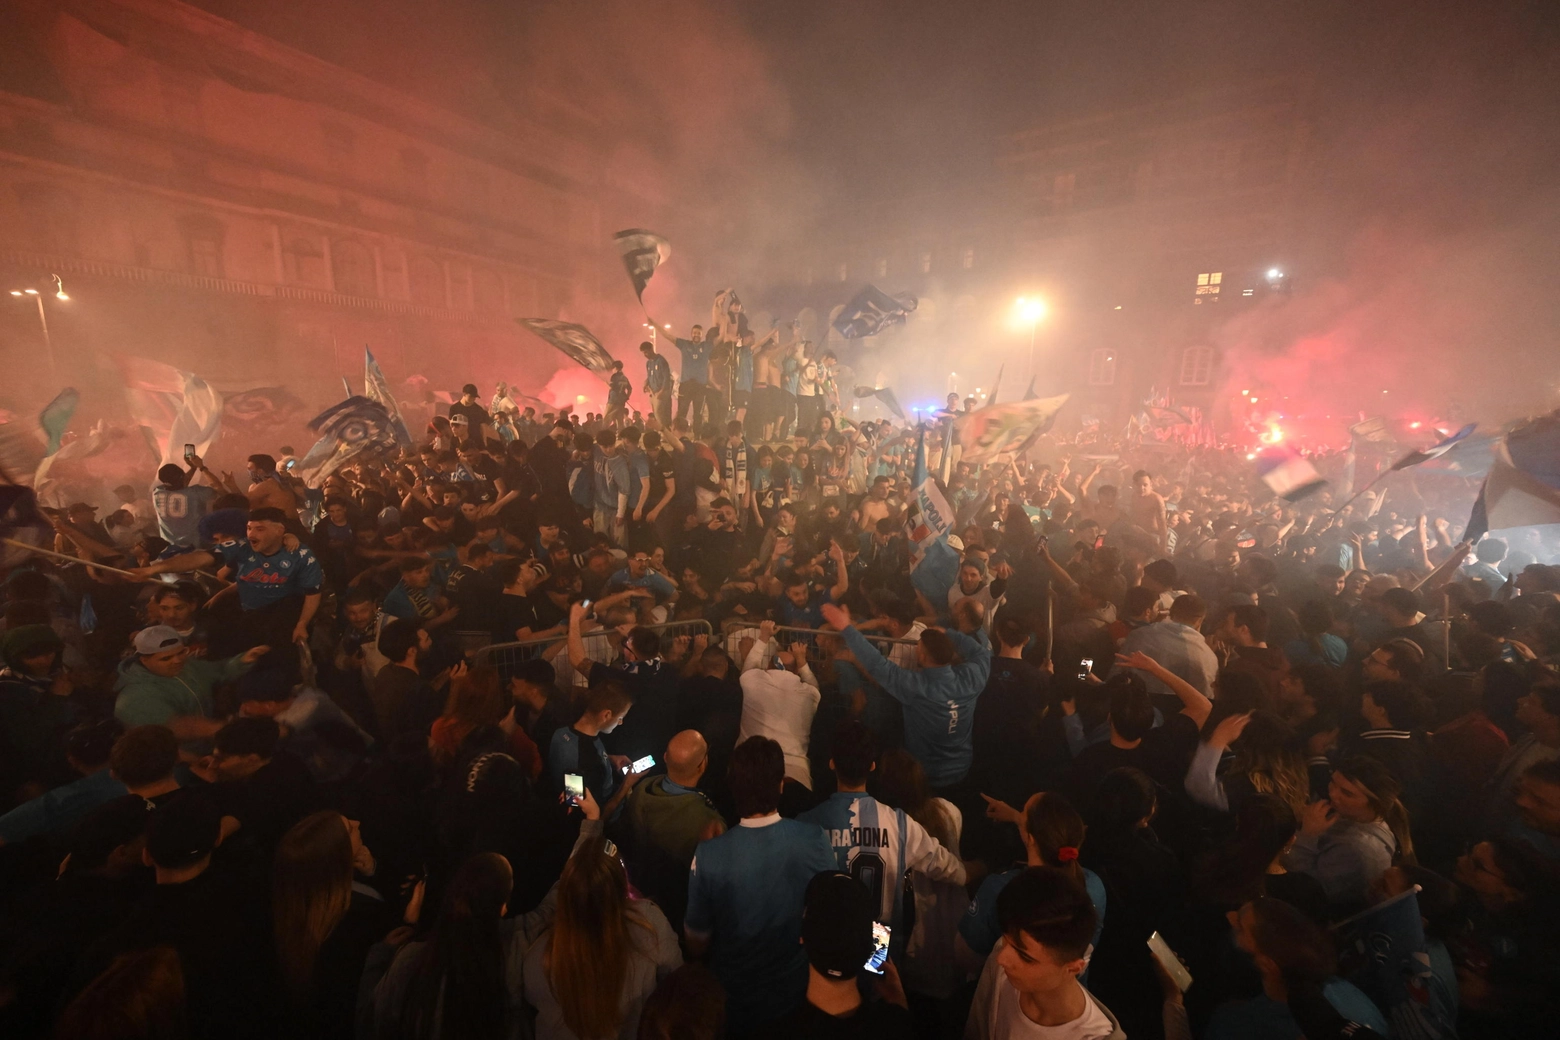 SSC Napoli’s supporters celebrate the victory of the Italian Serie A Championship (Scudetto) at the end of the match against Udinese Calcio in the centre of Naples, Italy, 04 May 2023.
ANSA/CIRO FUSCO